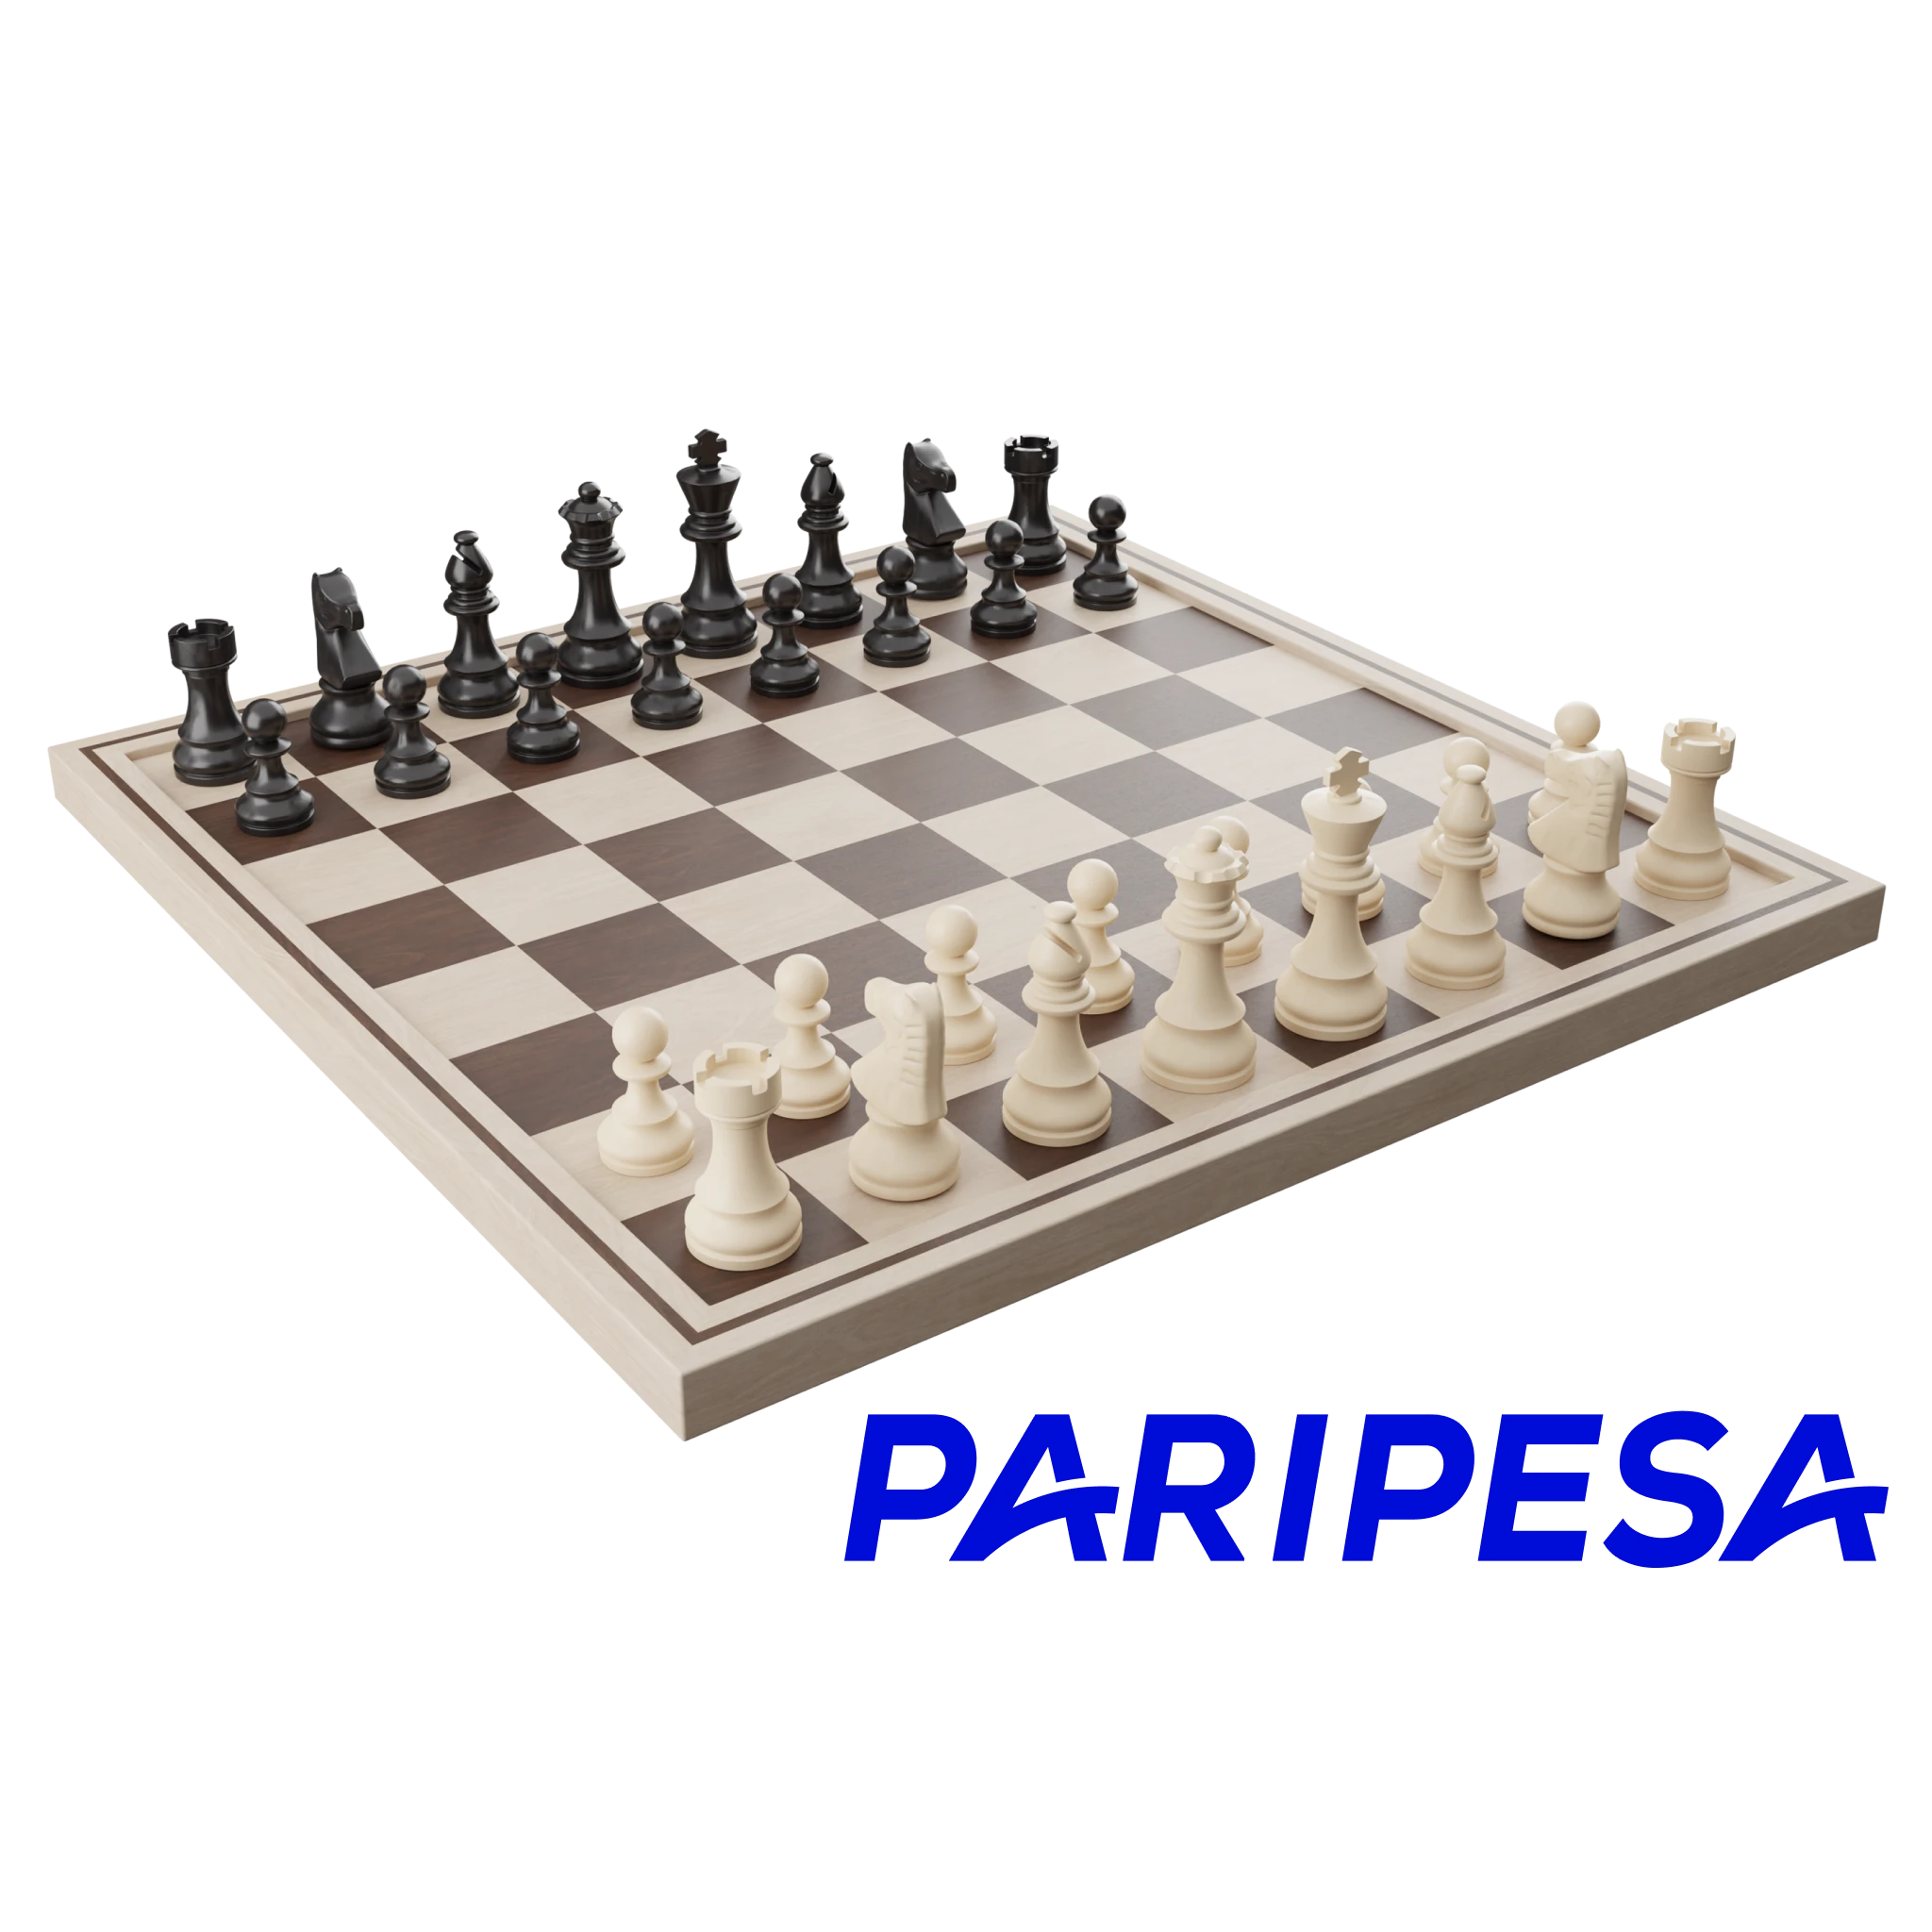 Discover the perfect platform to fulfill your chess ambitions with Paripesa.